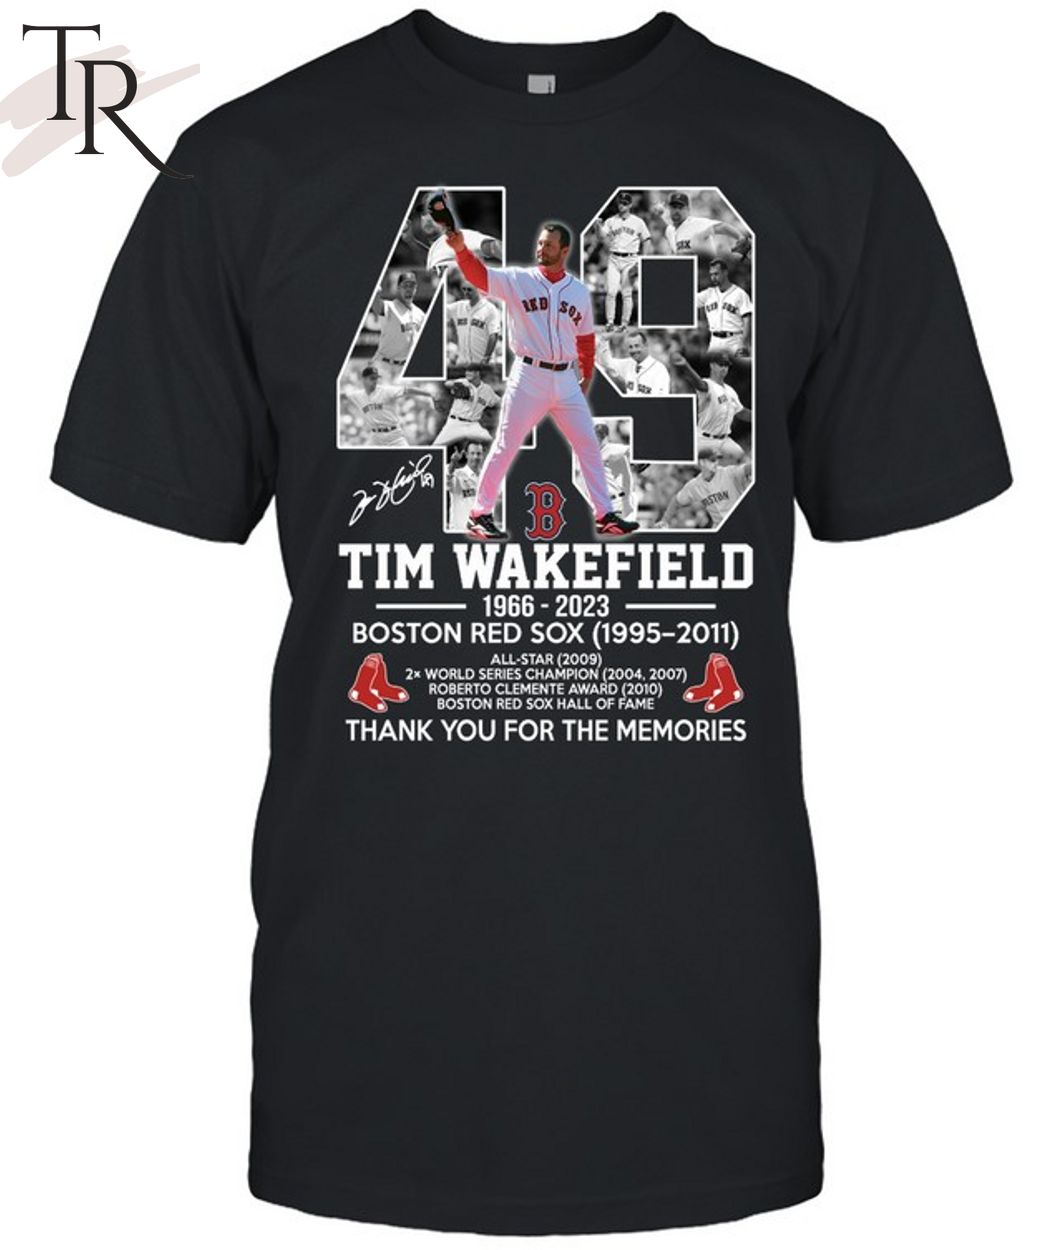 49 Tim Wakefield 1966 - 2023 Boston Red Sox 1995 - 2011 Thank You For The  Memories T-Shirt - Torunstyle